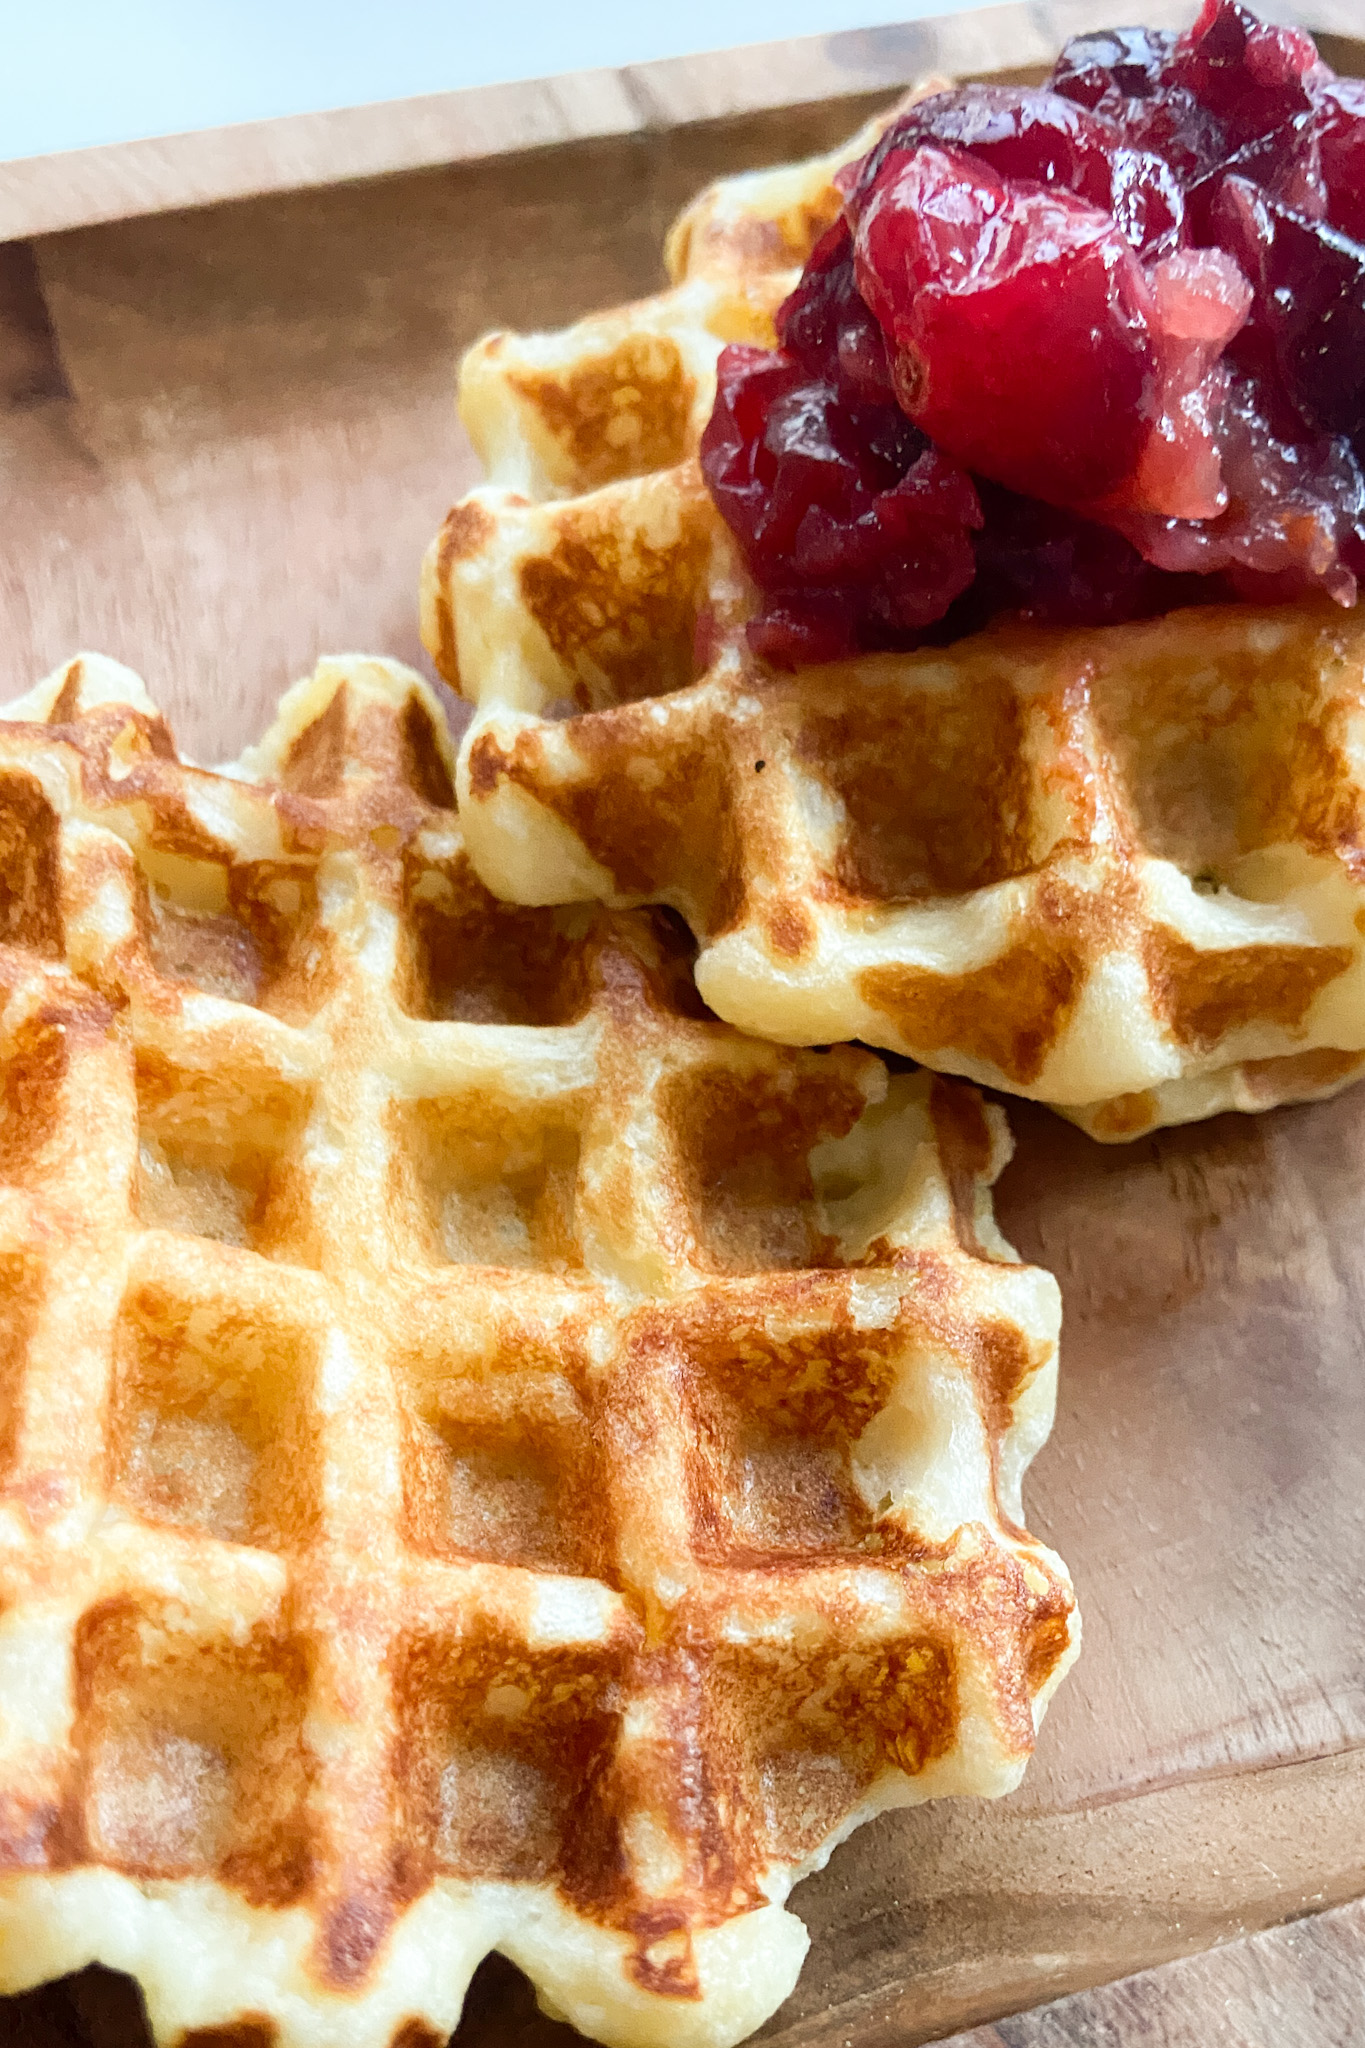 Mashed potato waffles topped with crushed cranberries.